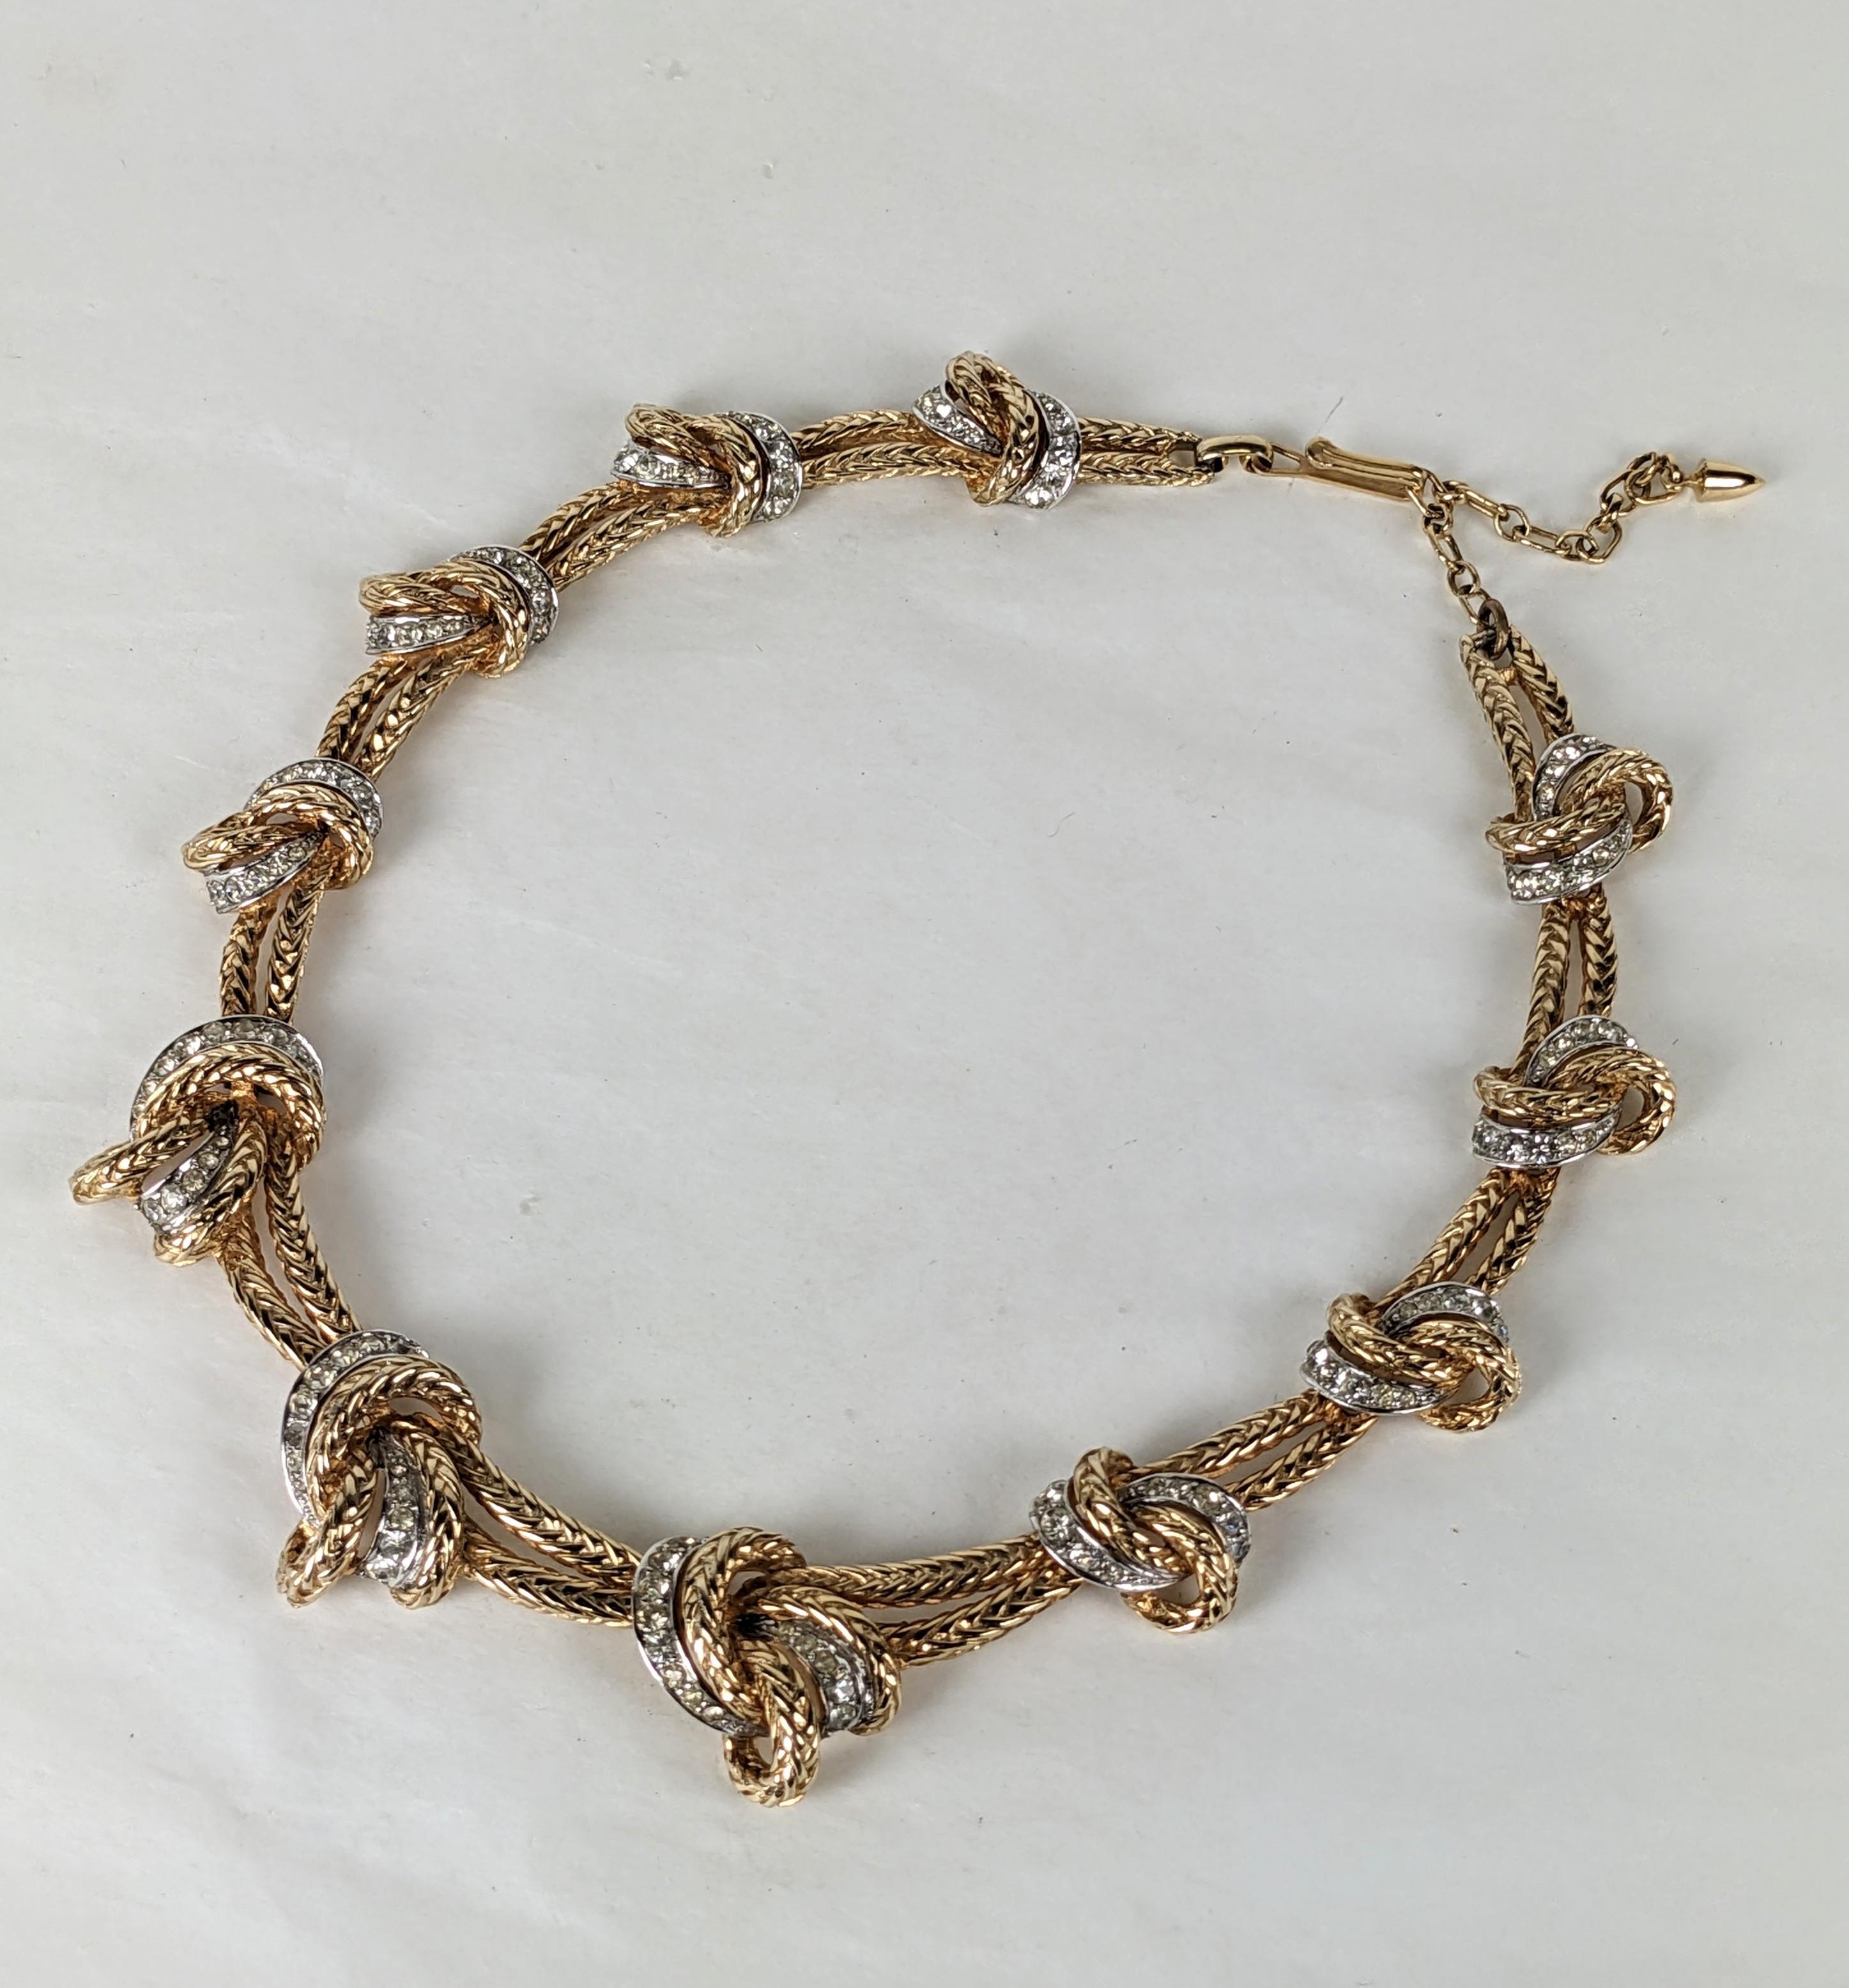 Marcel Boucher Elegant Gold and Pave Knot Necklace from the 1950's. Graduated knot motifs in braided gilt metal with pave accents. Adjustable length. Fits 15